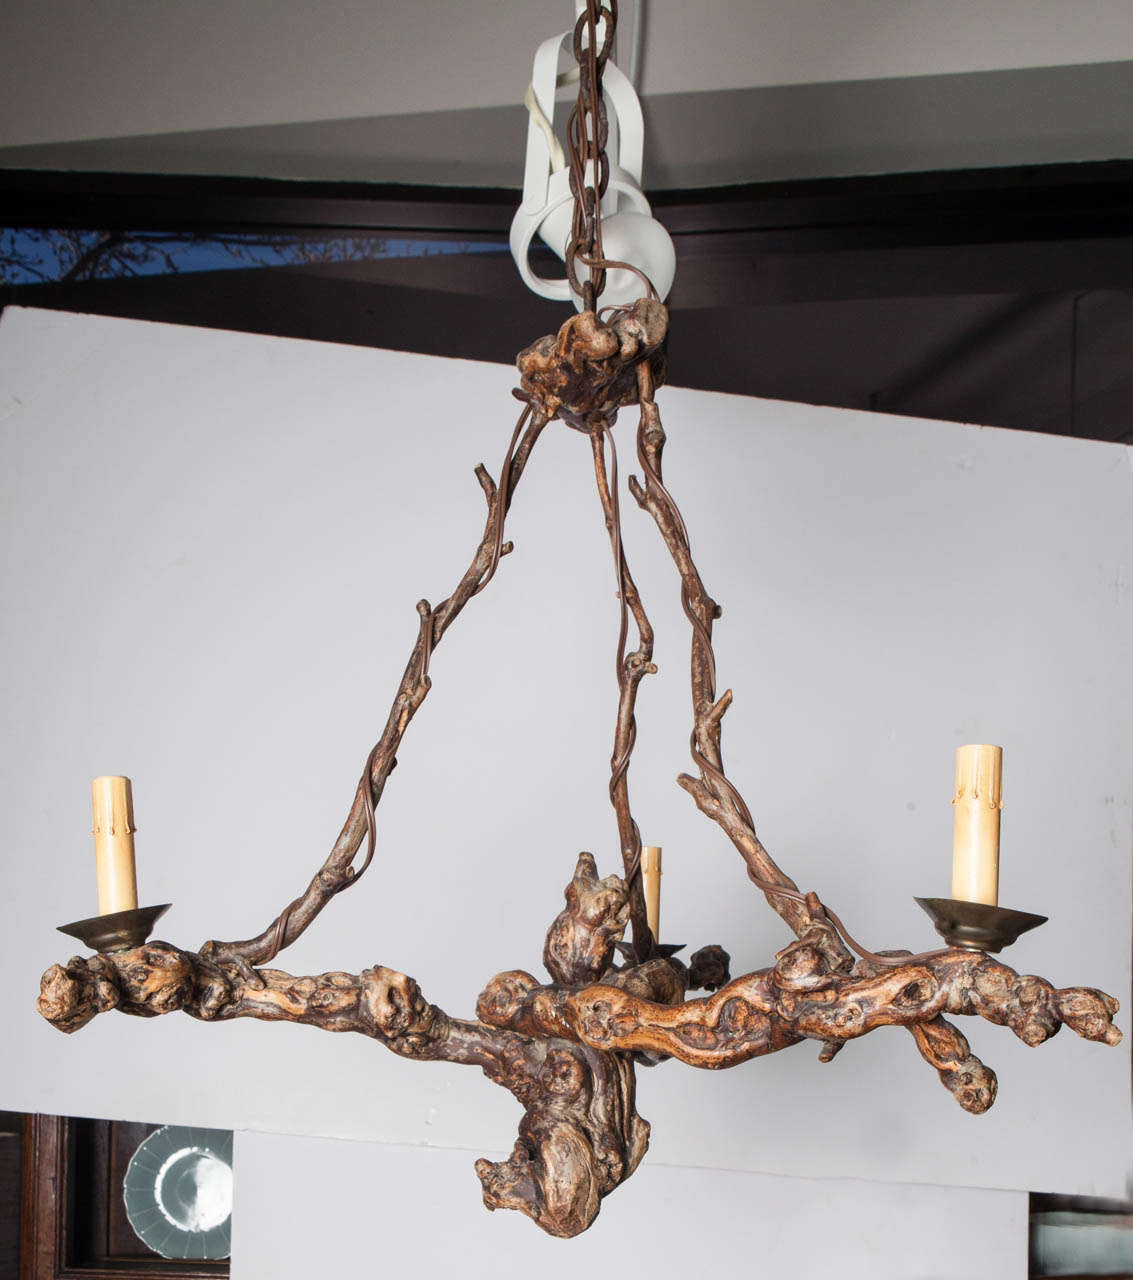 Old grapevine fashioned into a chandelier.  Electrified.